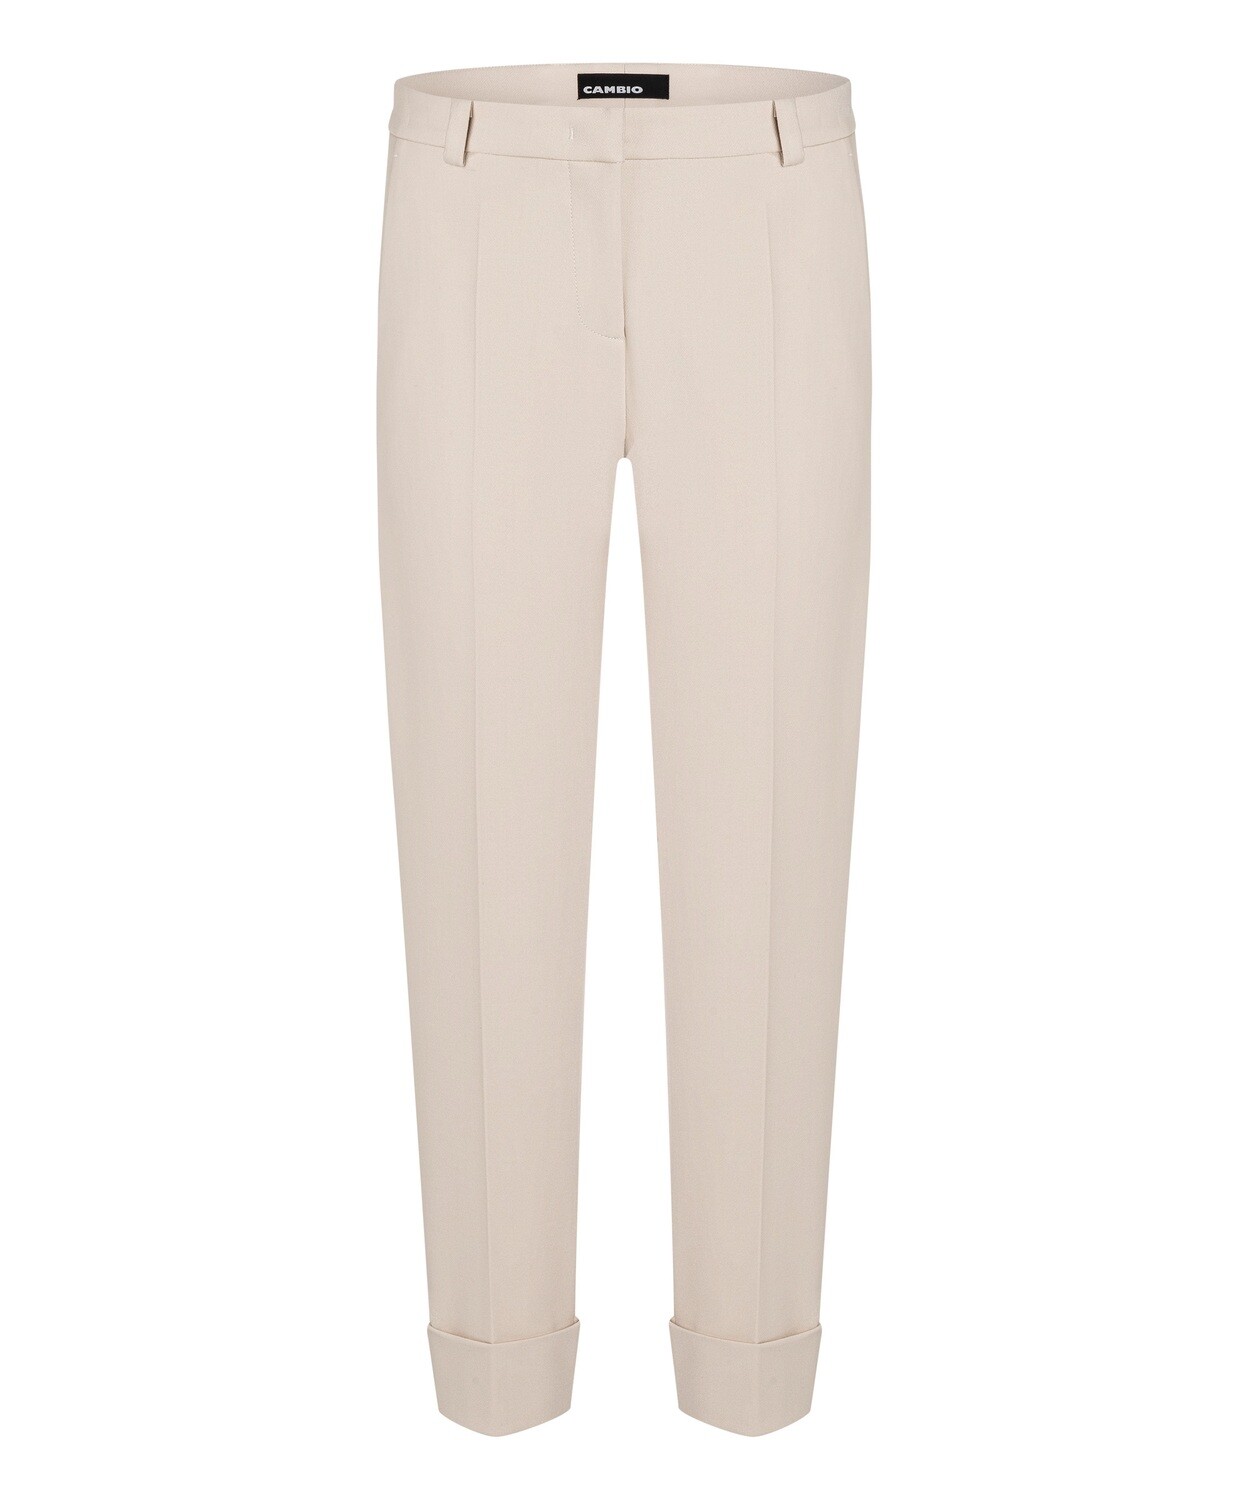 Cambio krystal style pant off white